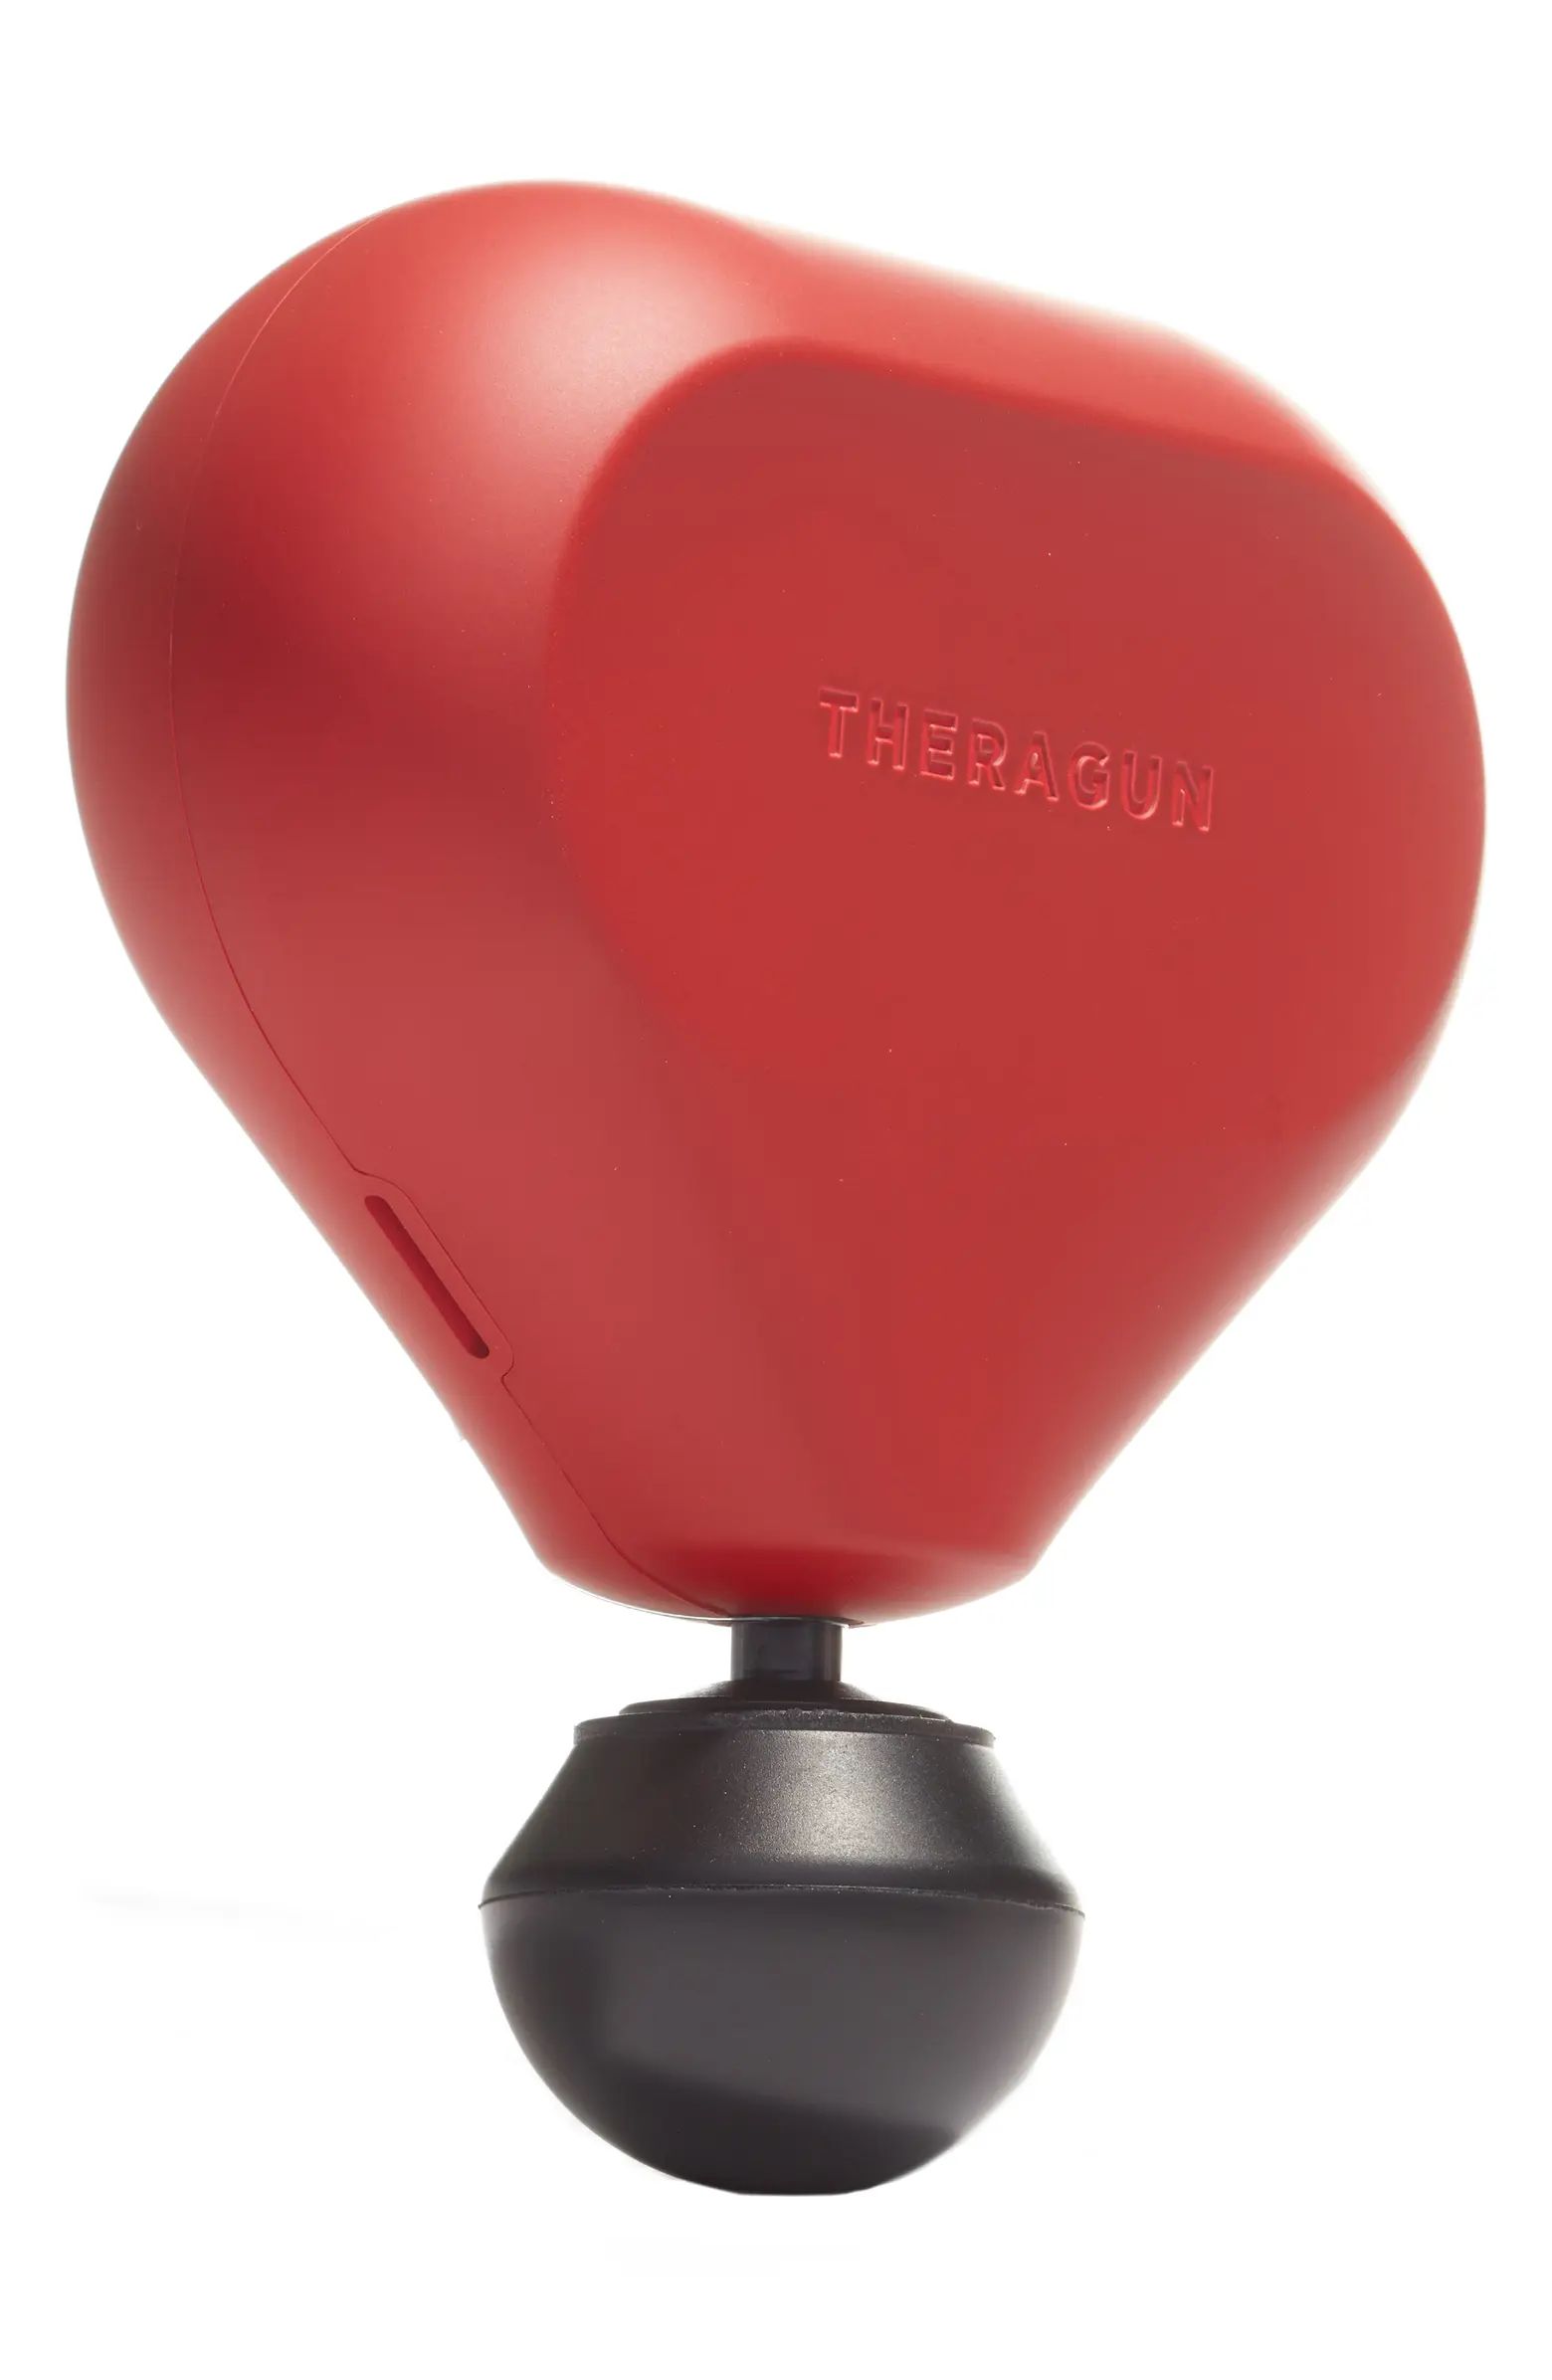 Theragun Mini (PRODUCT)RED Percussive Therapy Device | Nordstrom | Nordstrom